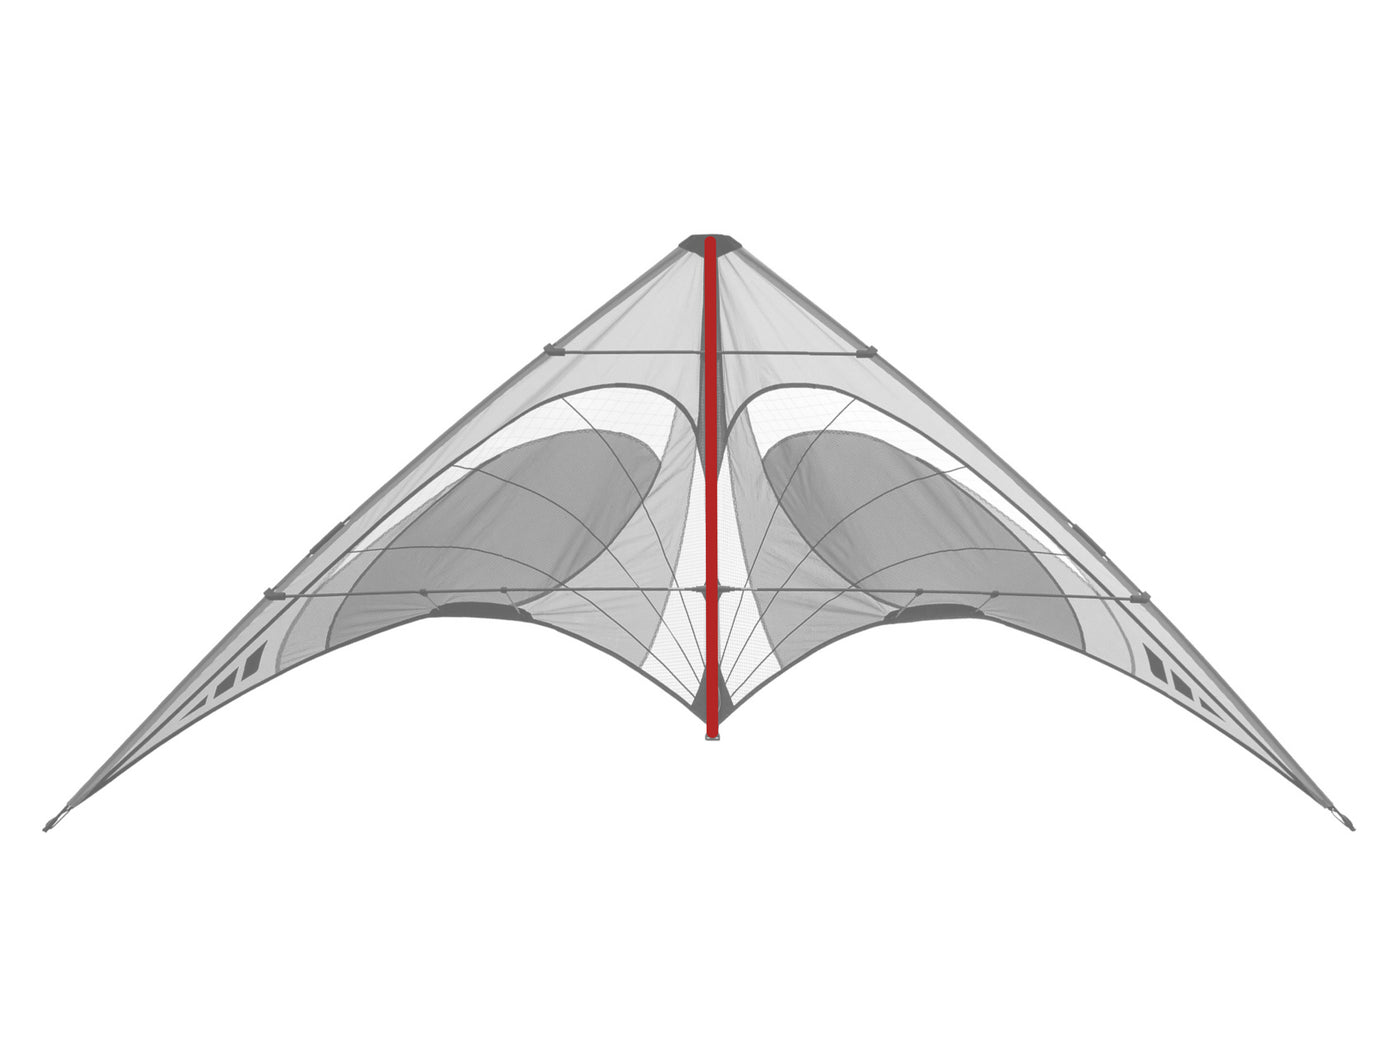 Diagram showing location of the Quantum Spine on the kite.